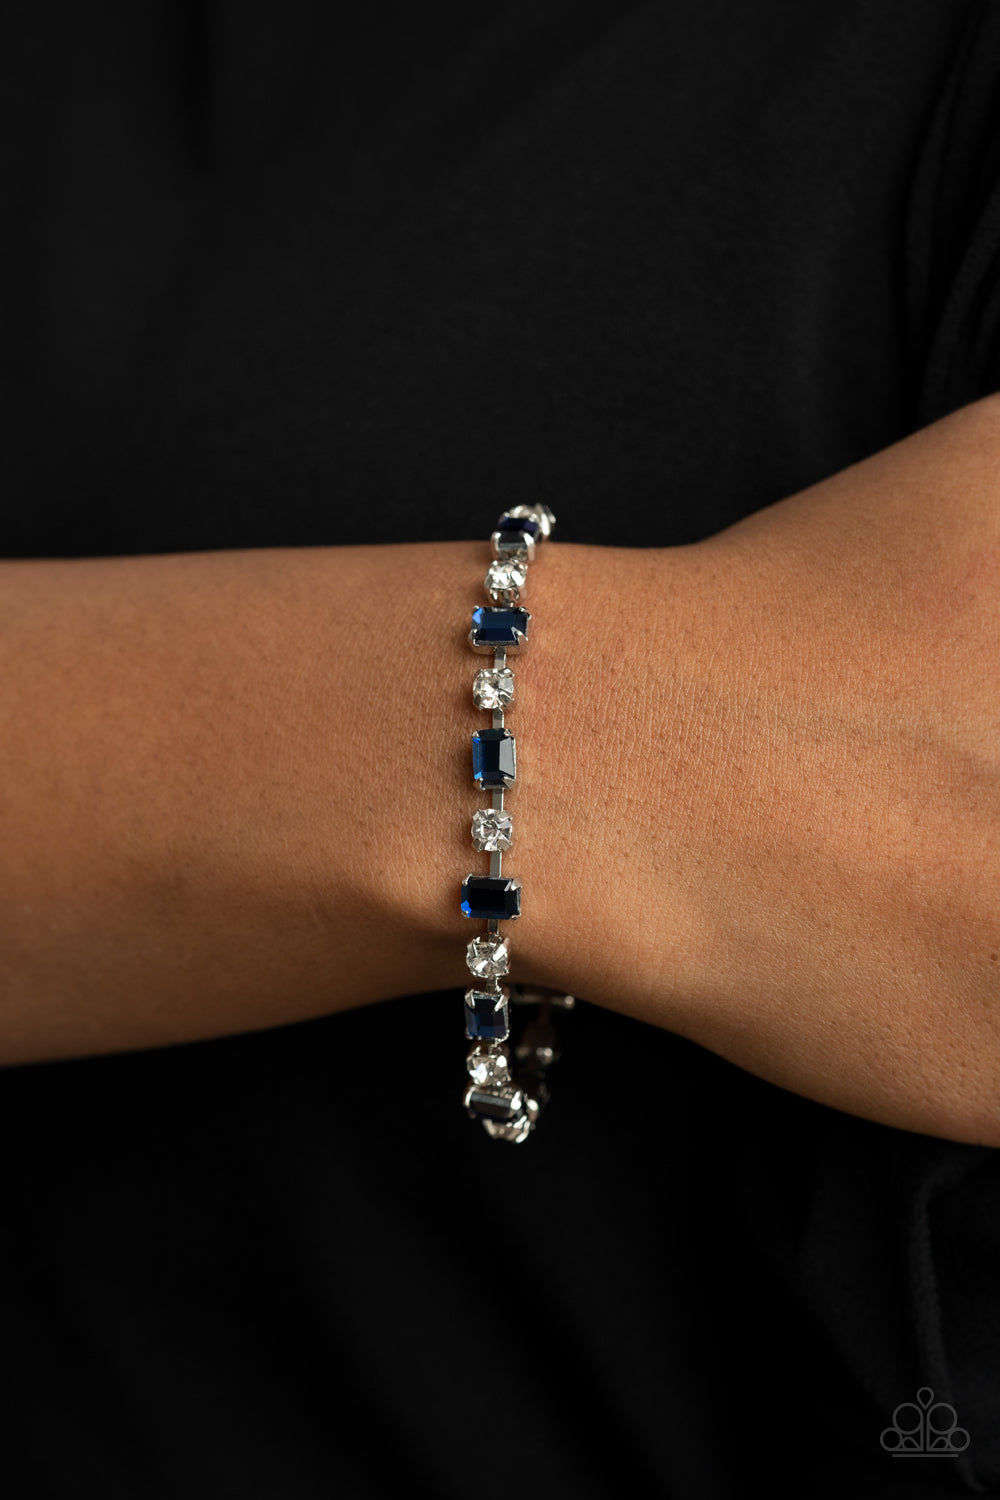 Out In Full FIERCE Blue Bracelet - Paparazzi Accessories  Featuring pronged silver fittings, emerald cut blue rhinestones alter in position as they alternate with classic white rhinestones around the wrist for a timeless look. Features an adjustable clasp closure.  All Paparazzi Accessories are lead free and nickel free!  Sold as one individual bracelet.